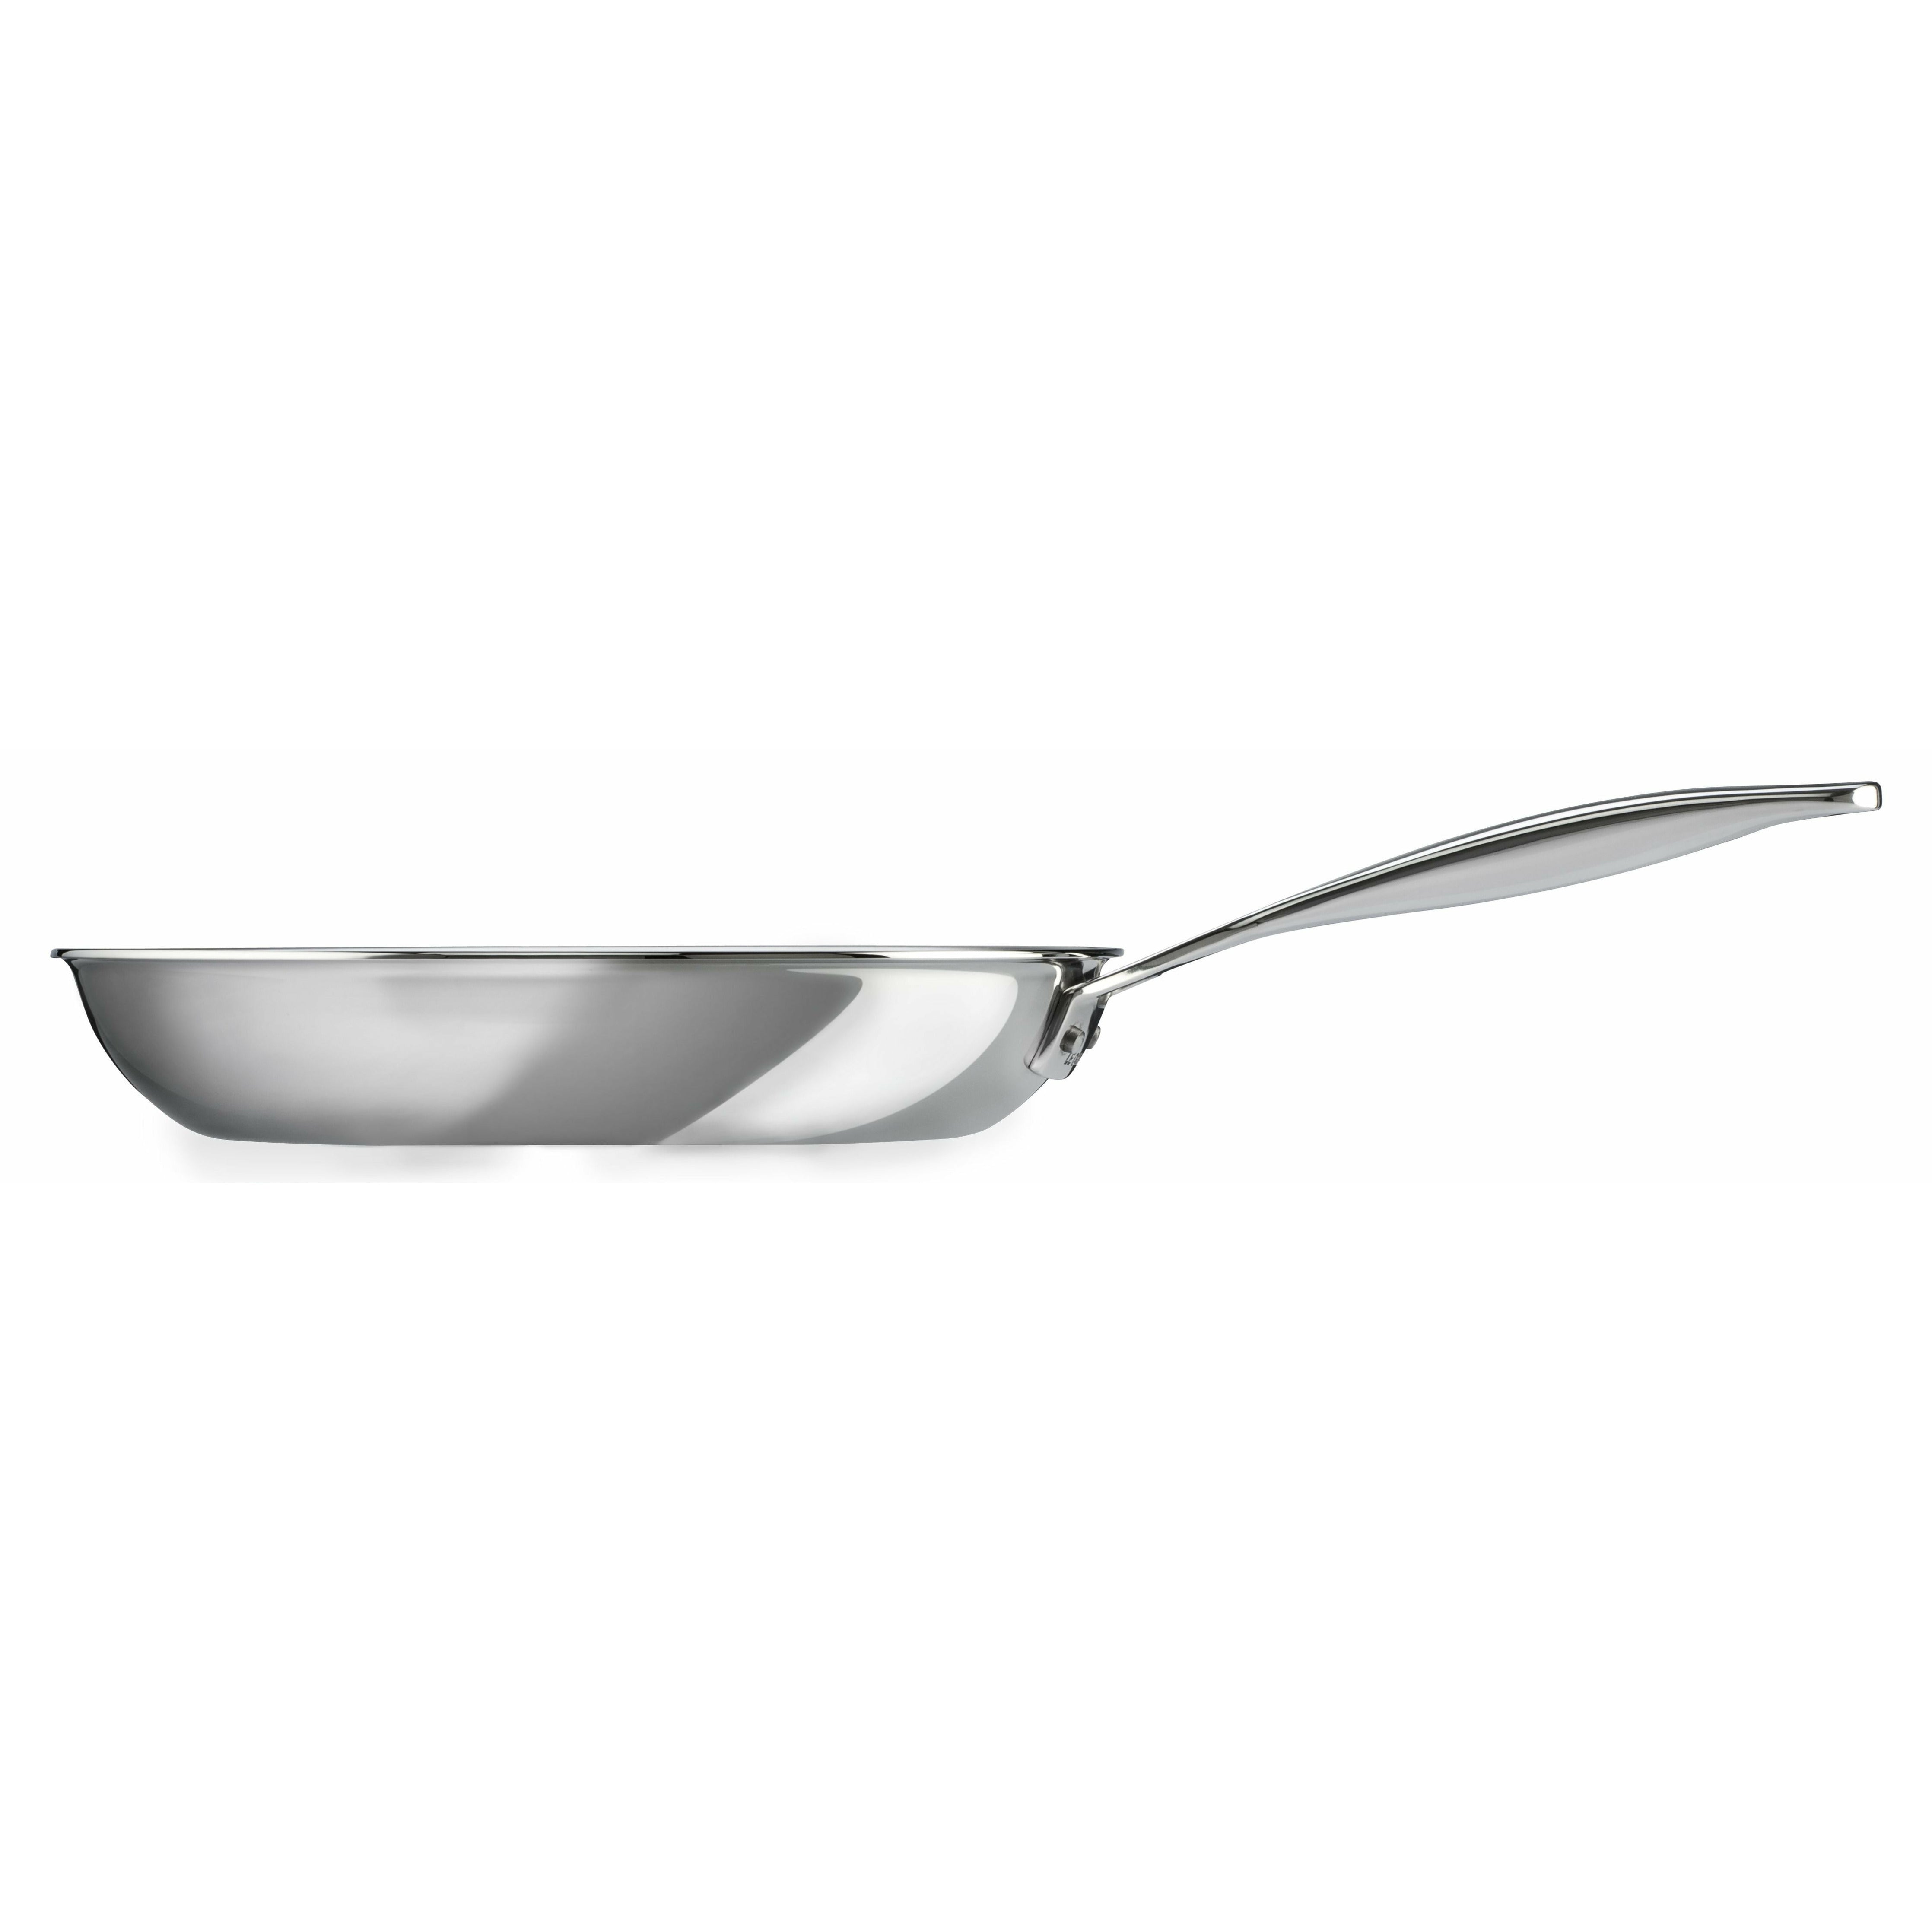 Le Creuset Signature Stainless Steel Uncoated Frying Pan, 26 Cm